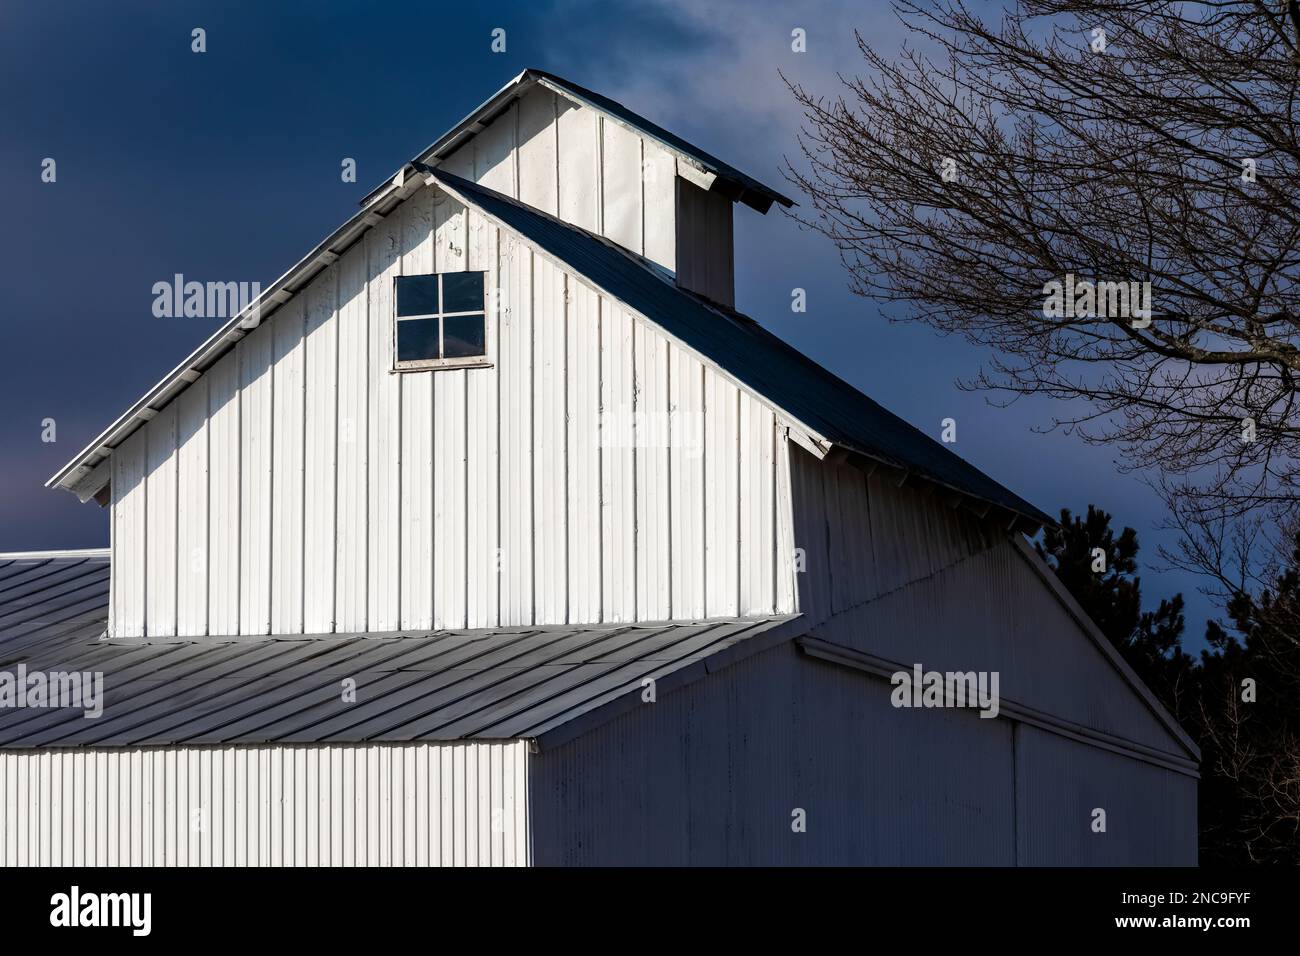 Amish barn topped with cupola in Mecosta County, Michigan, USA [No property release; editorial licensing only] Stock Photo